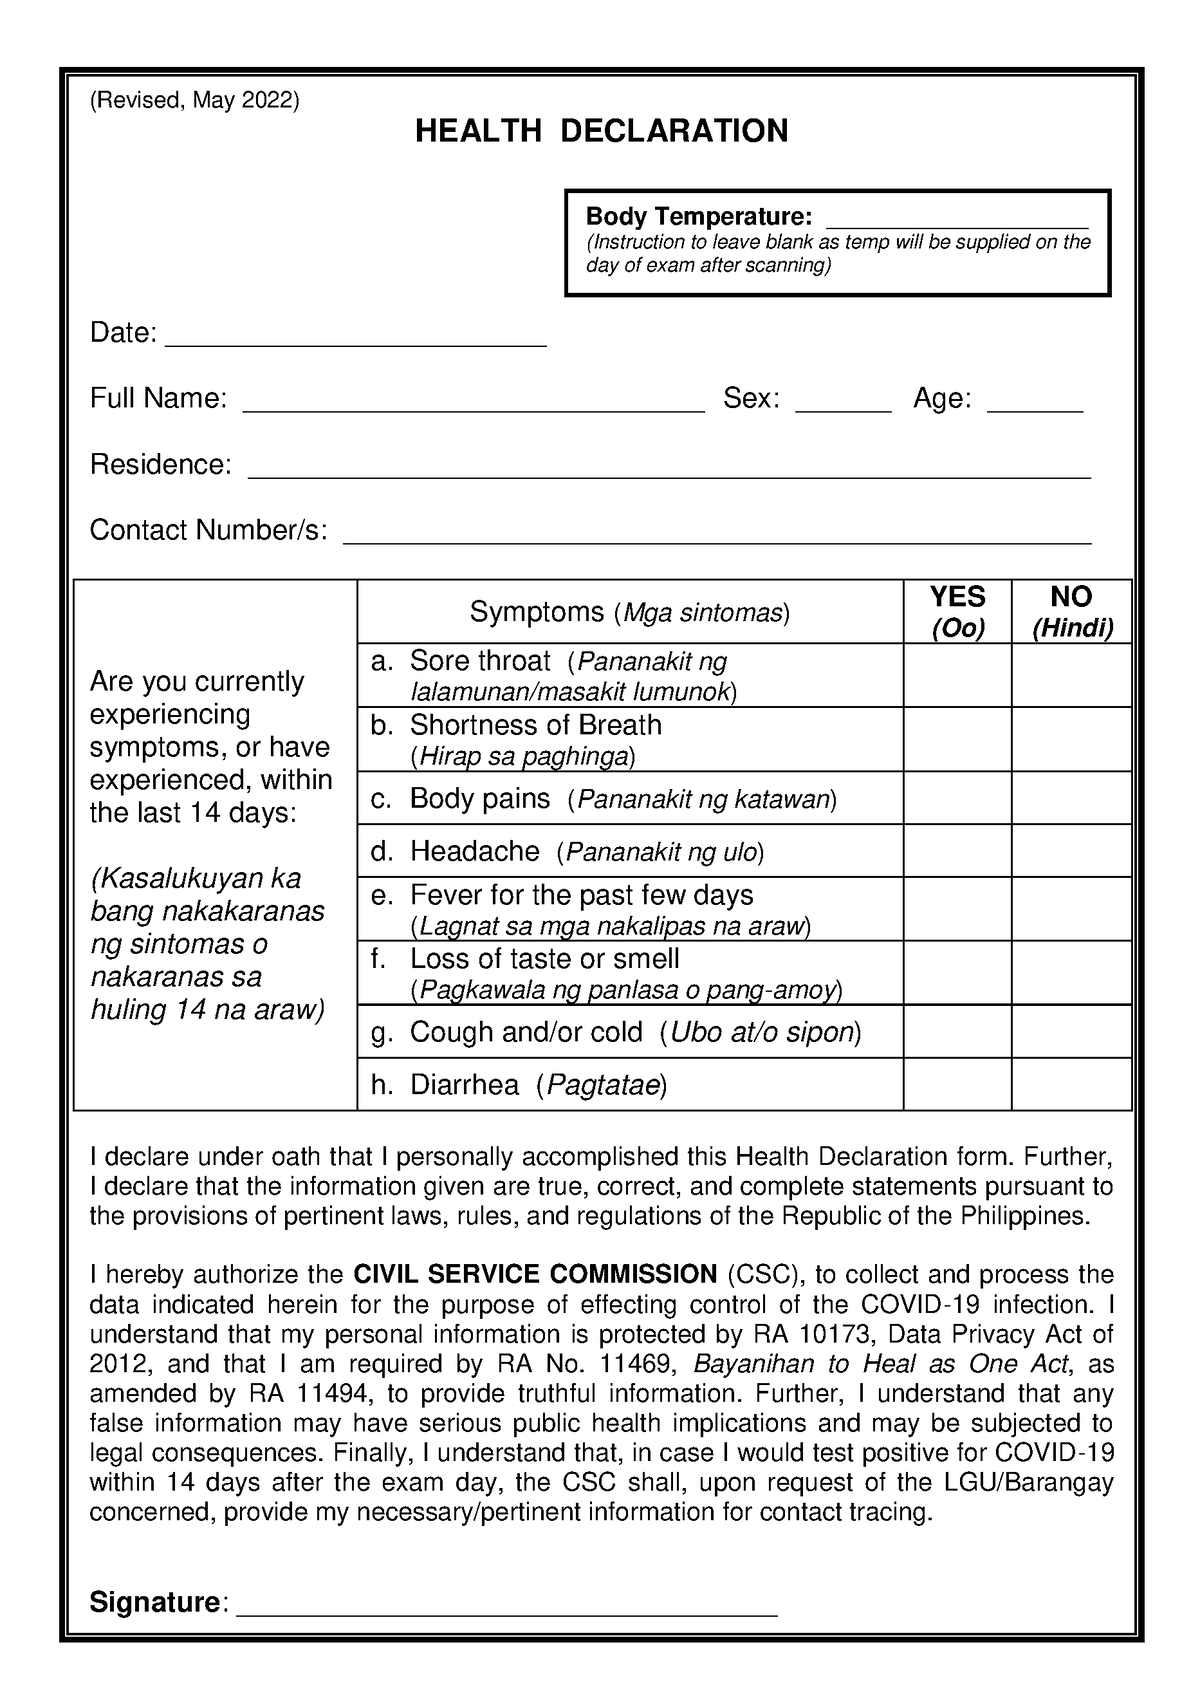 Health Declaration Form 2022 05 revised A5 A 07 22 Revised May